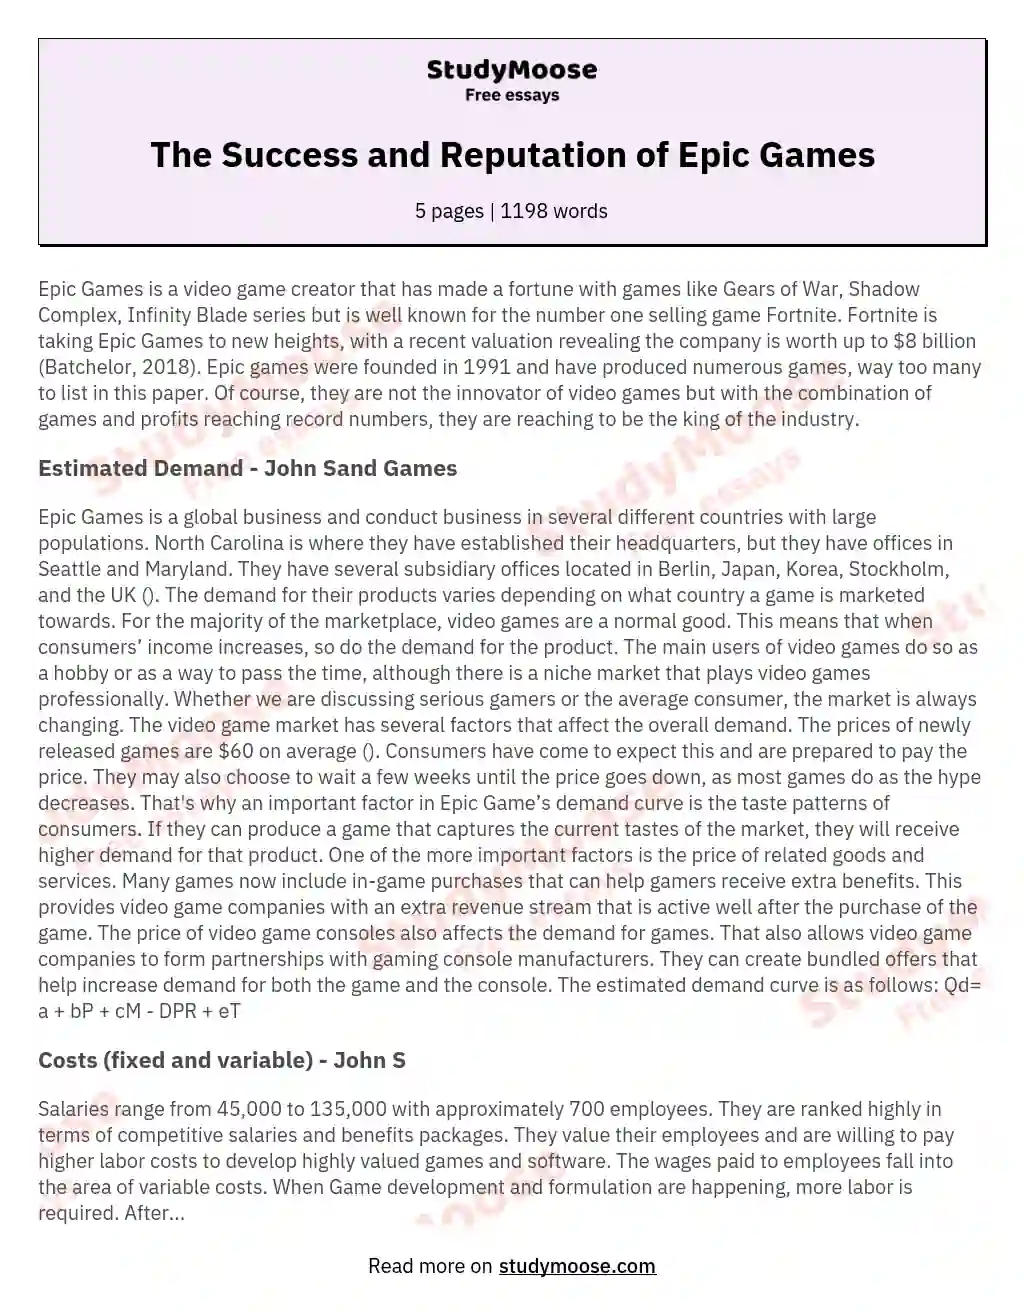 The Success and Reputation of Epic Games essay